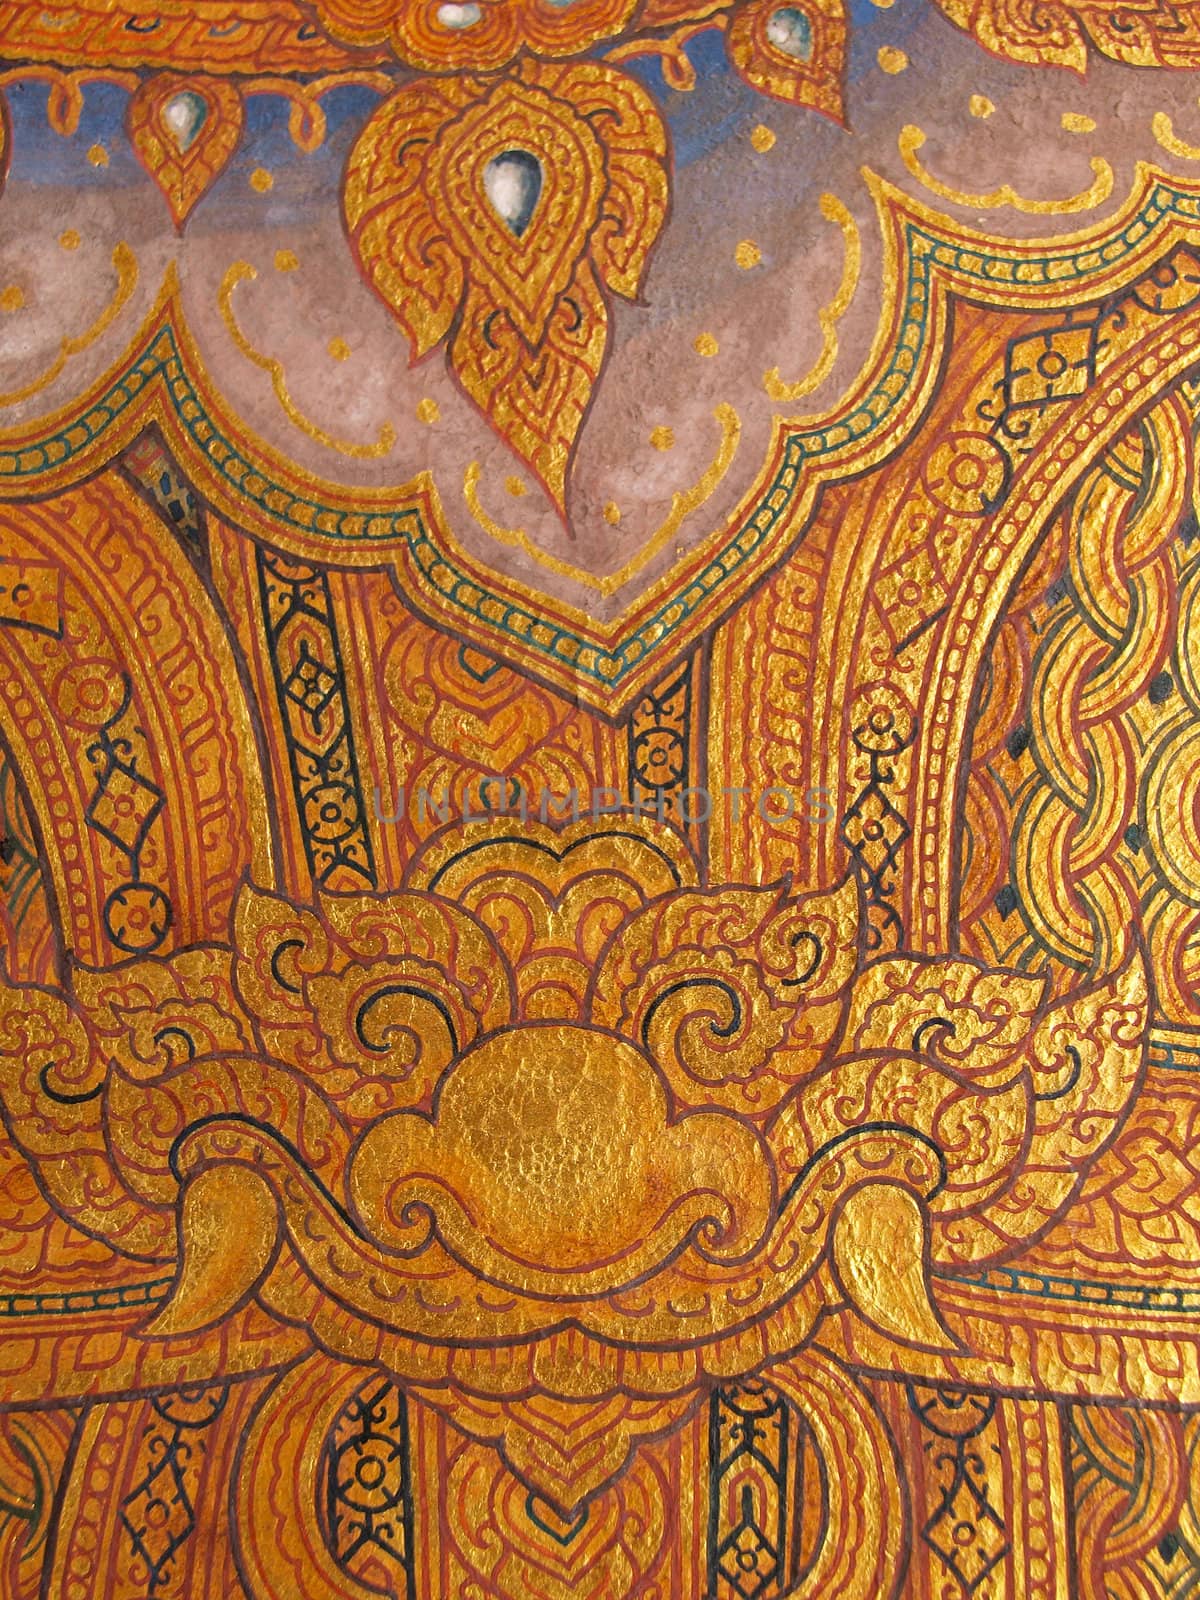 Wall art painting and texture in temple Thailand. painting about Ramayana epic story.